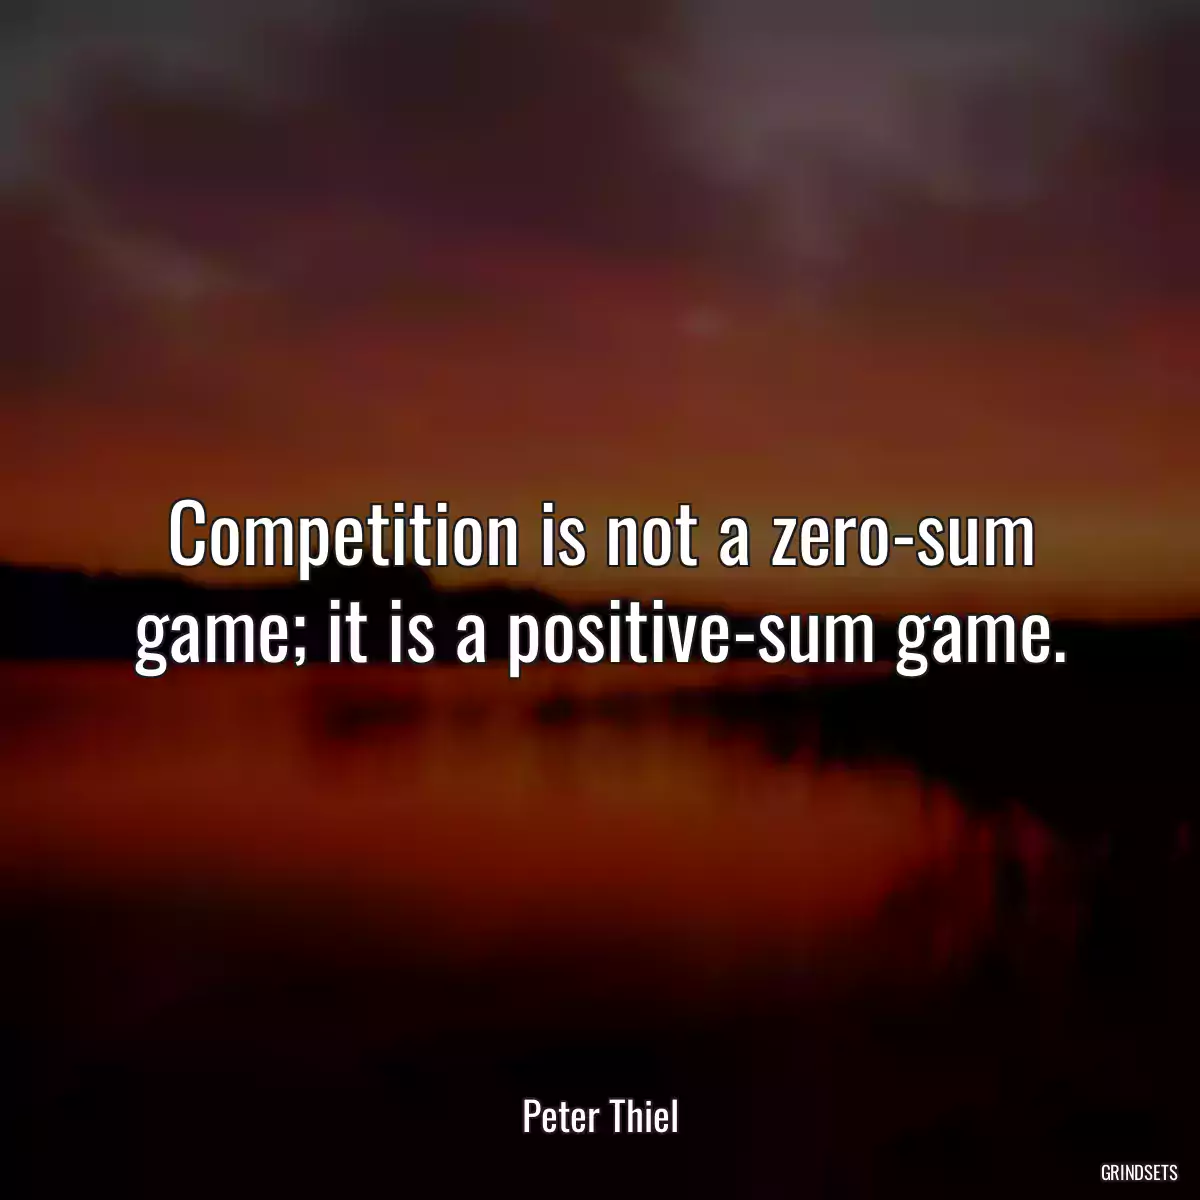 Competition is not a zero-sum game; it is a positive-sum game.